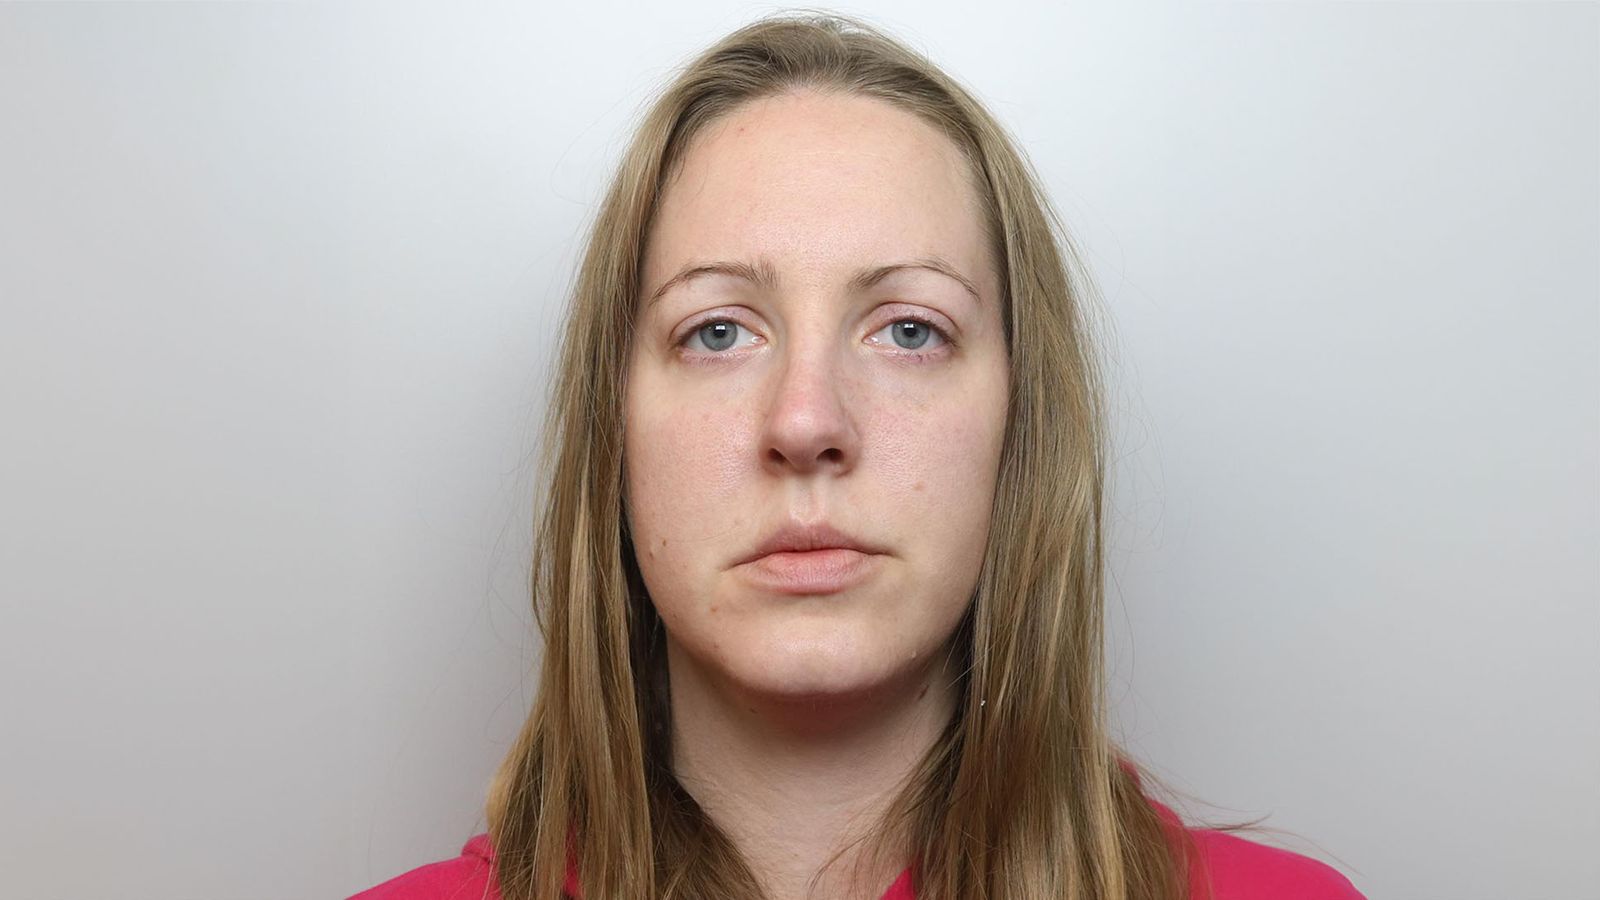 Nurse Lucy Letby found guilty of murdering seven babies on neonatal unit